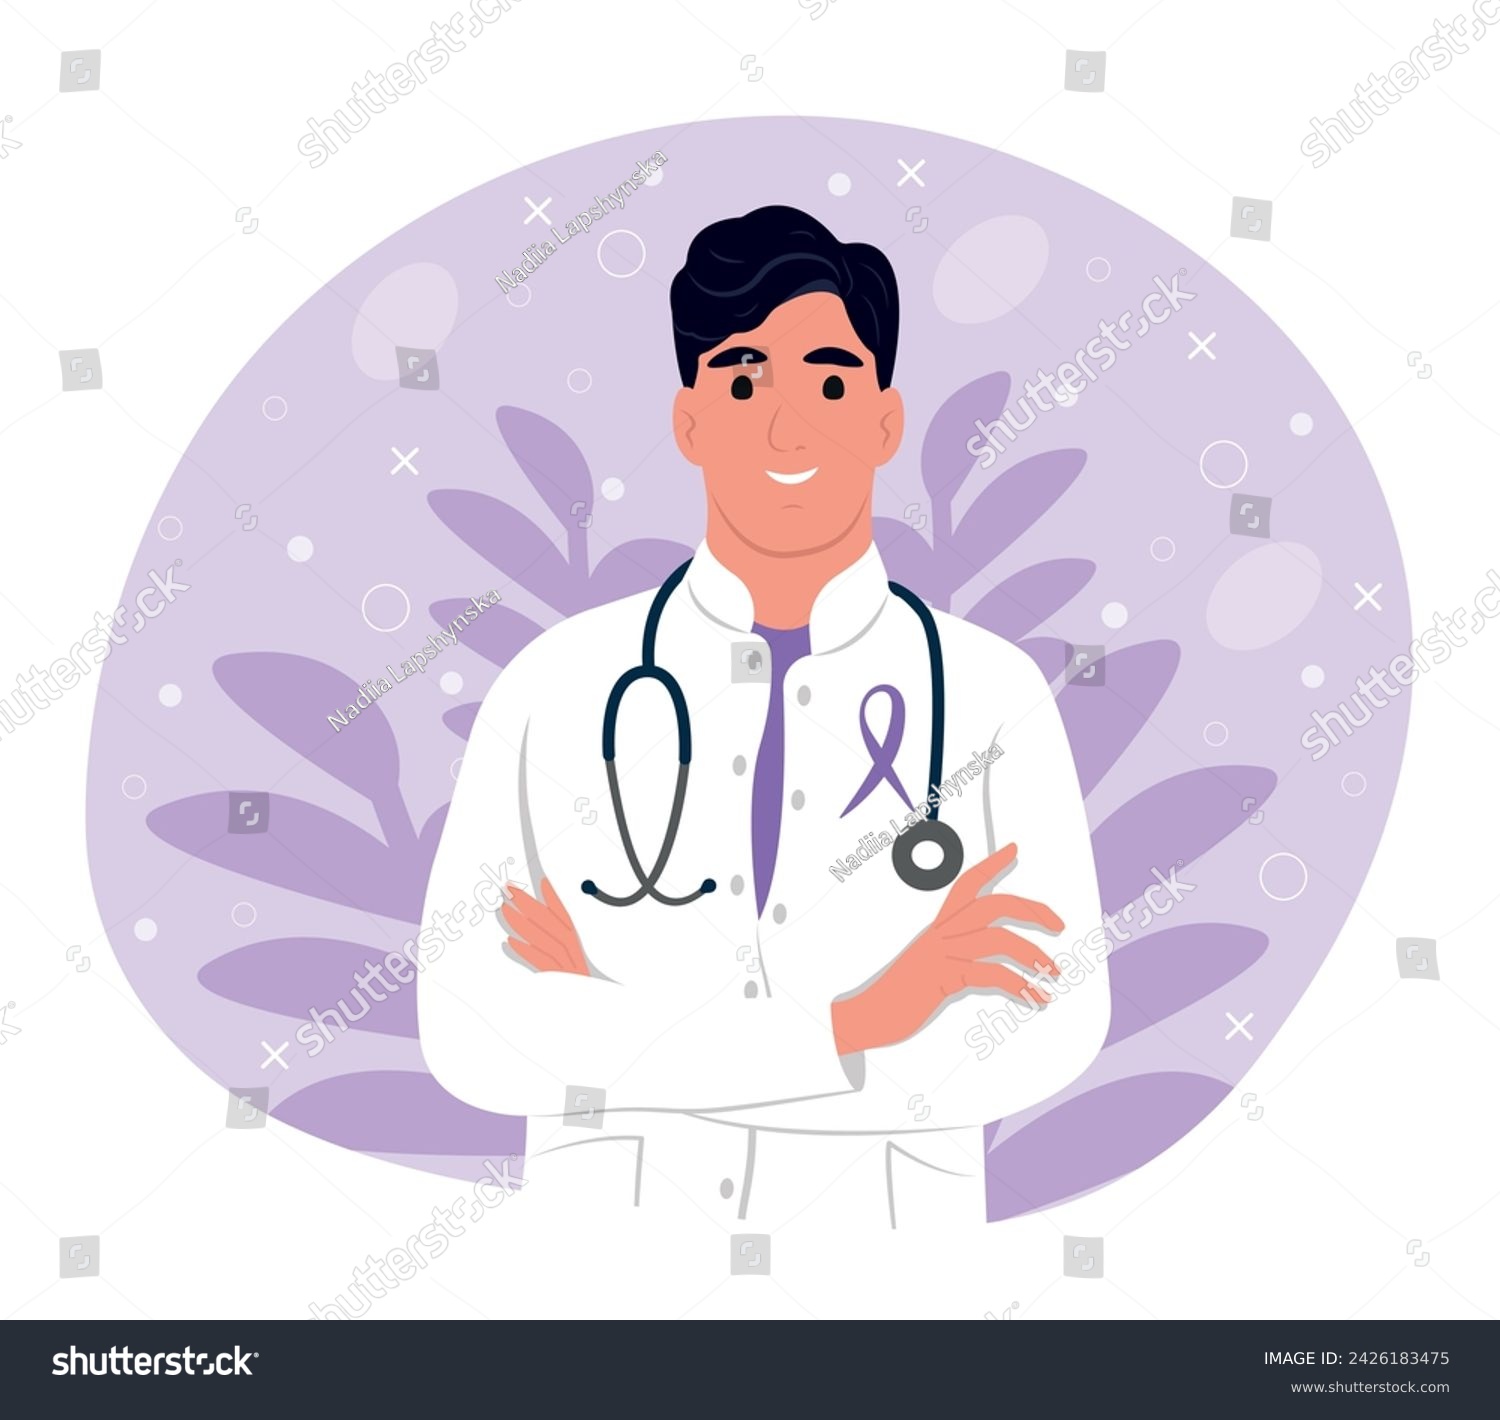 SVG of Purple awareness of ribbon. Doctor in medical uniform. Woman doctor portrait. Doctor with a stethoscope. Smiling therapist, general practitioner with crossed arms. svg